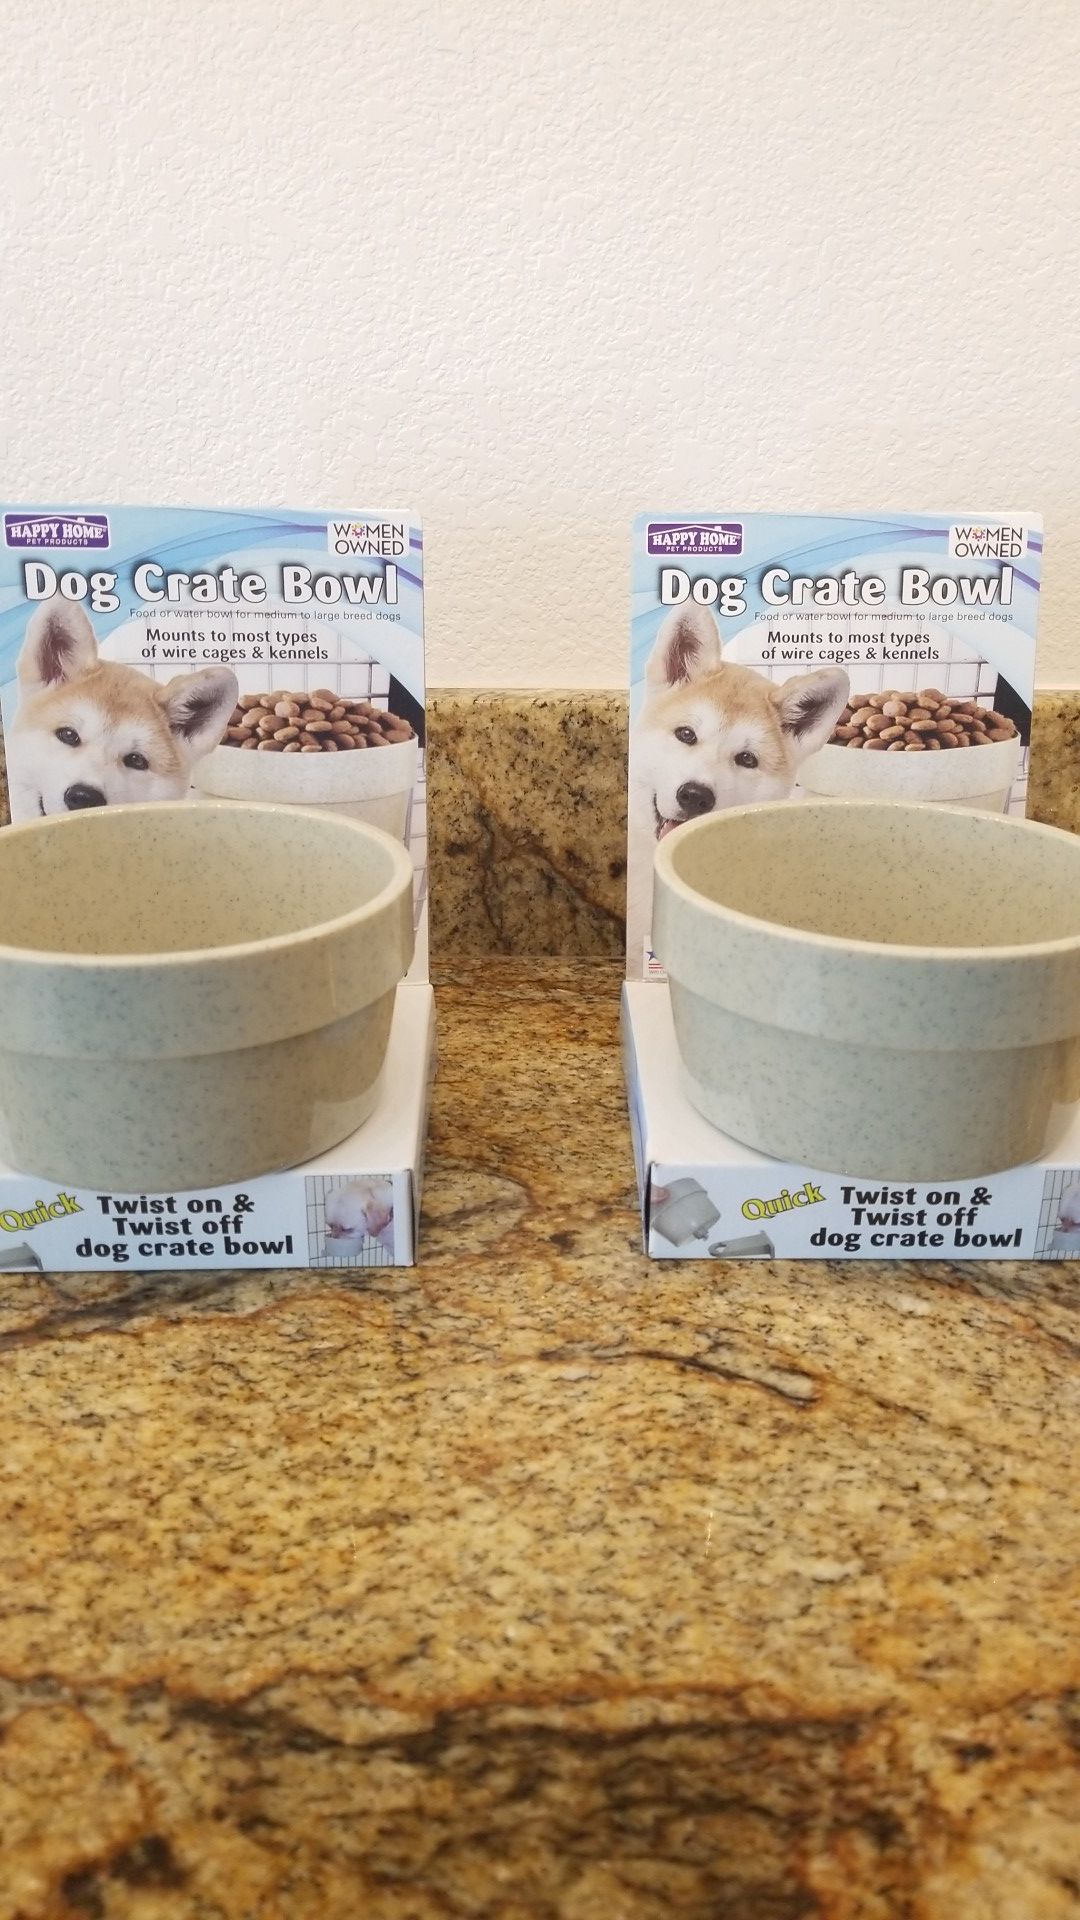 Happy Home Dog Crate Bowls